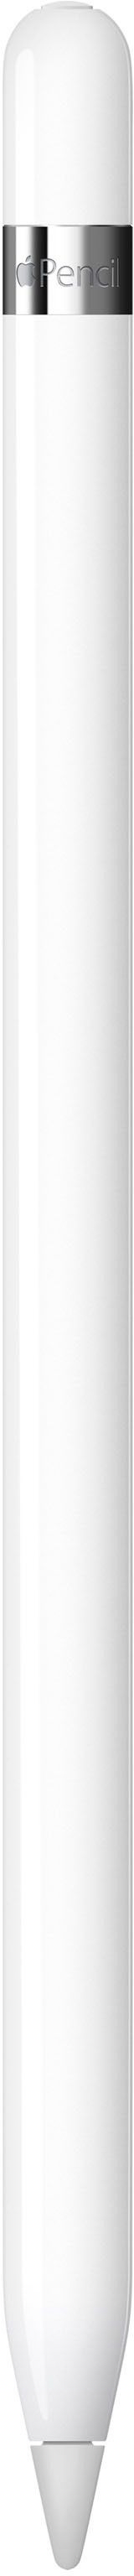 Apple Pencil (1st Generation) with USB-C to Pencil Adapter White MQLY3AM/A - Best Buy | Best Buy U.S.